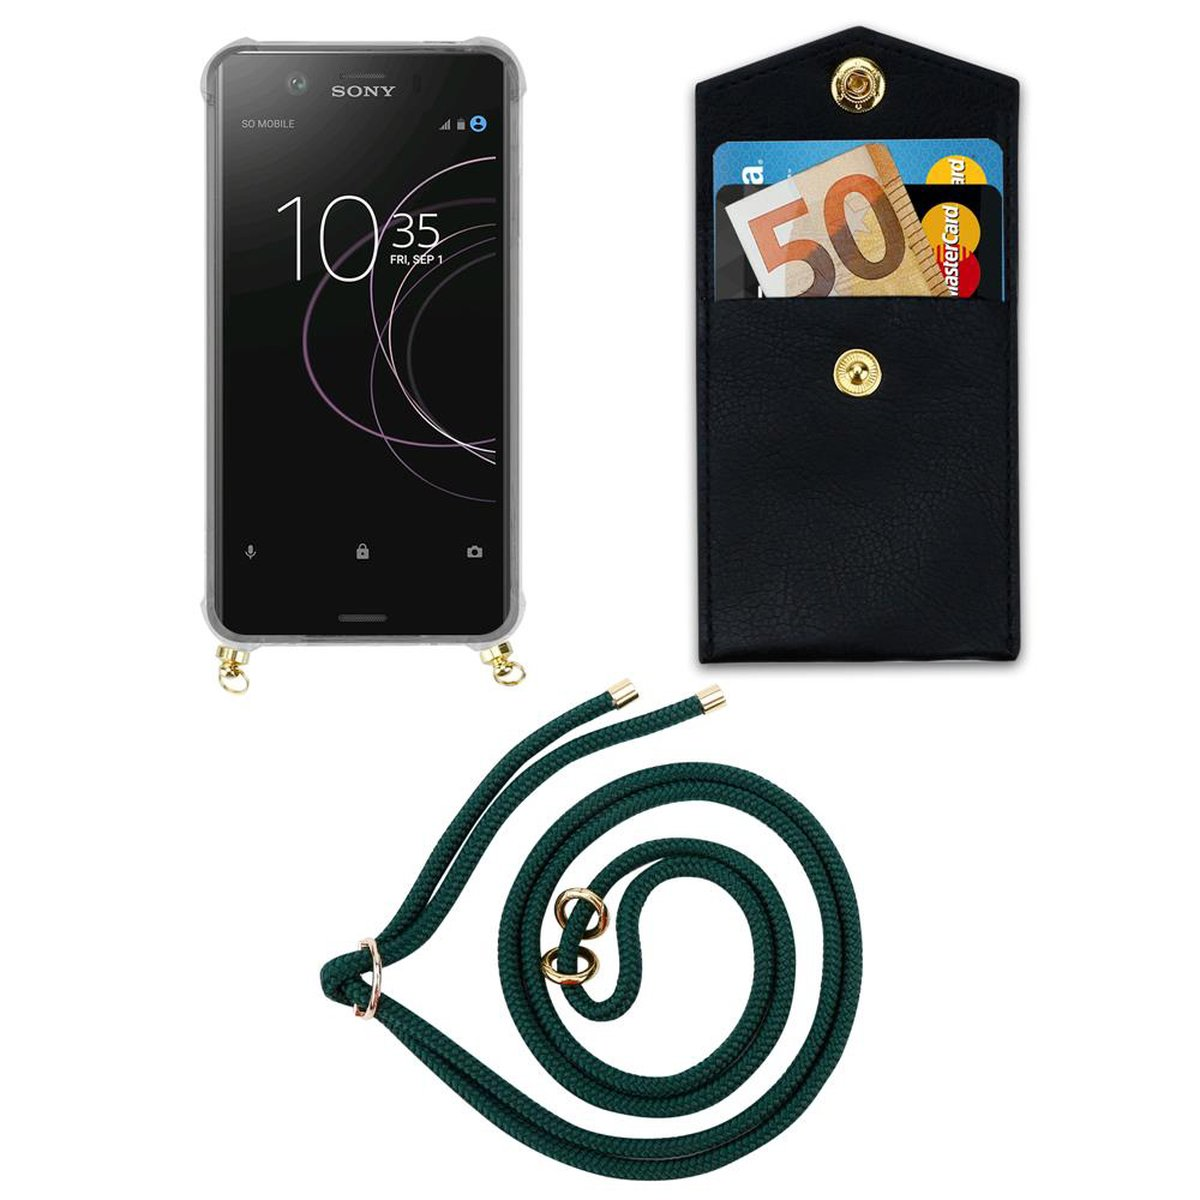 Hülle, COMPACT, XZ1 abnehmbarer Sony, Handy Backcover, Xperia Kordel Gold GRÜN Band ARMEE mit und Ringen, CADORABO Kette